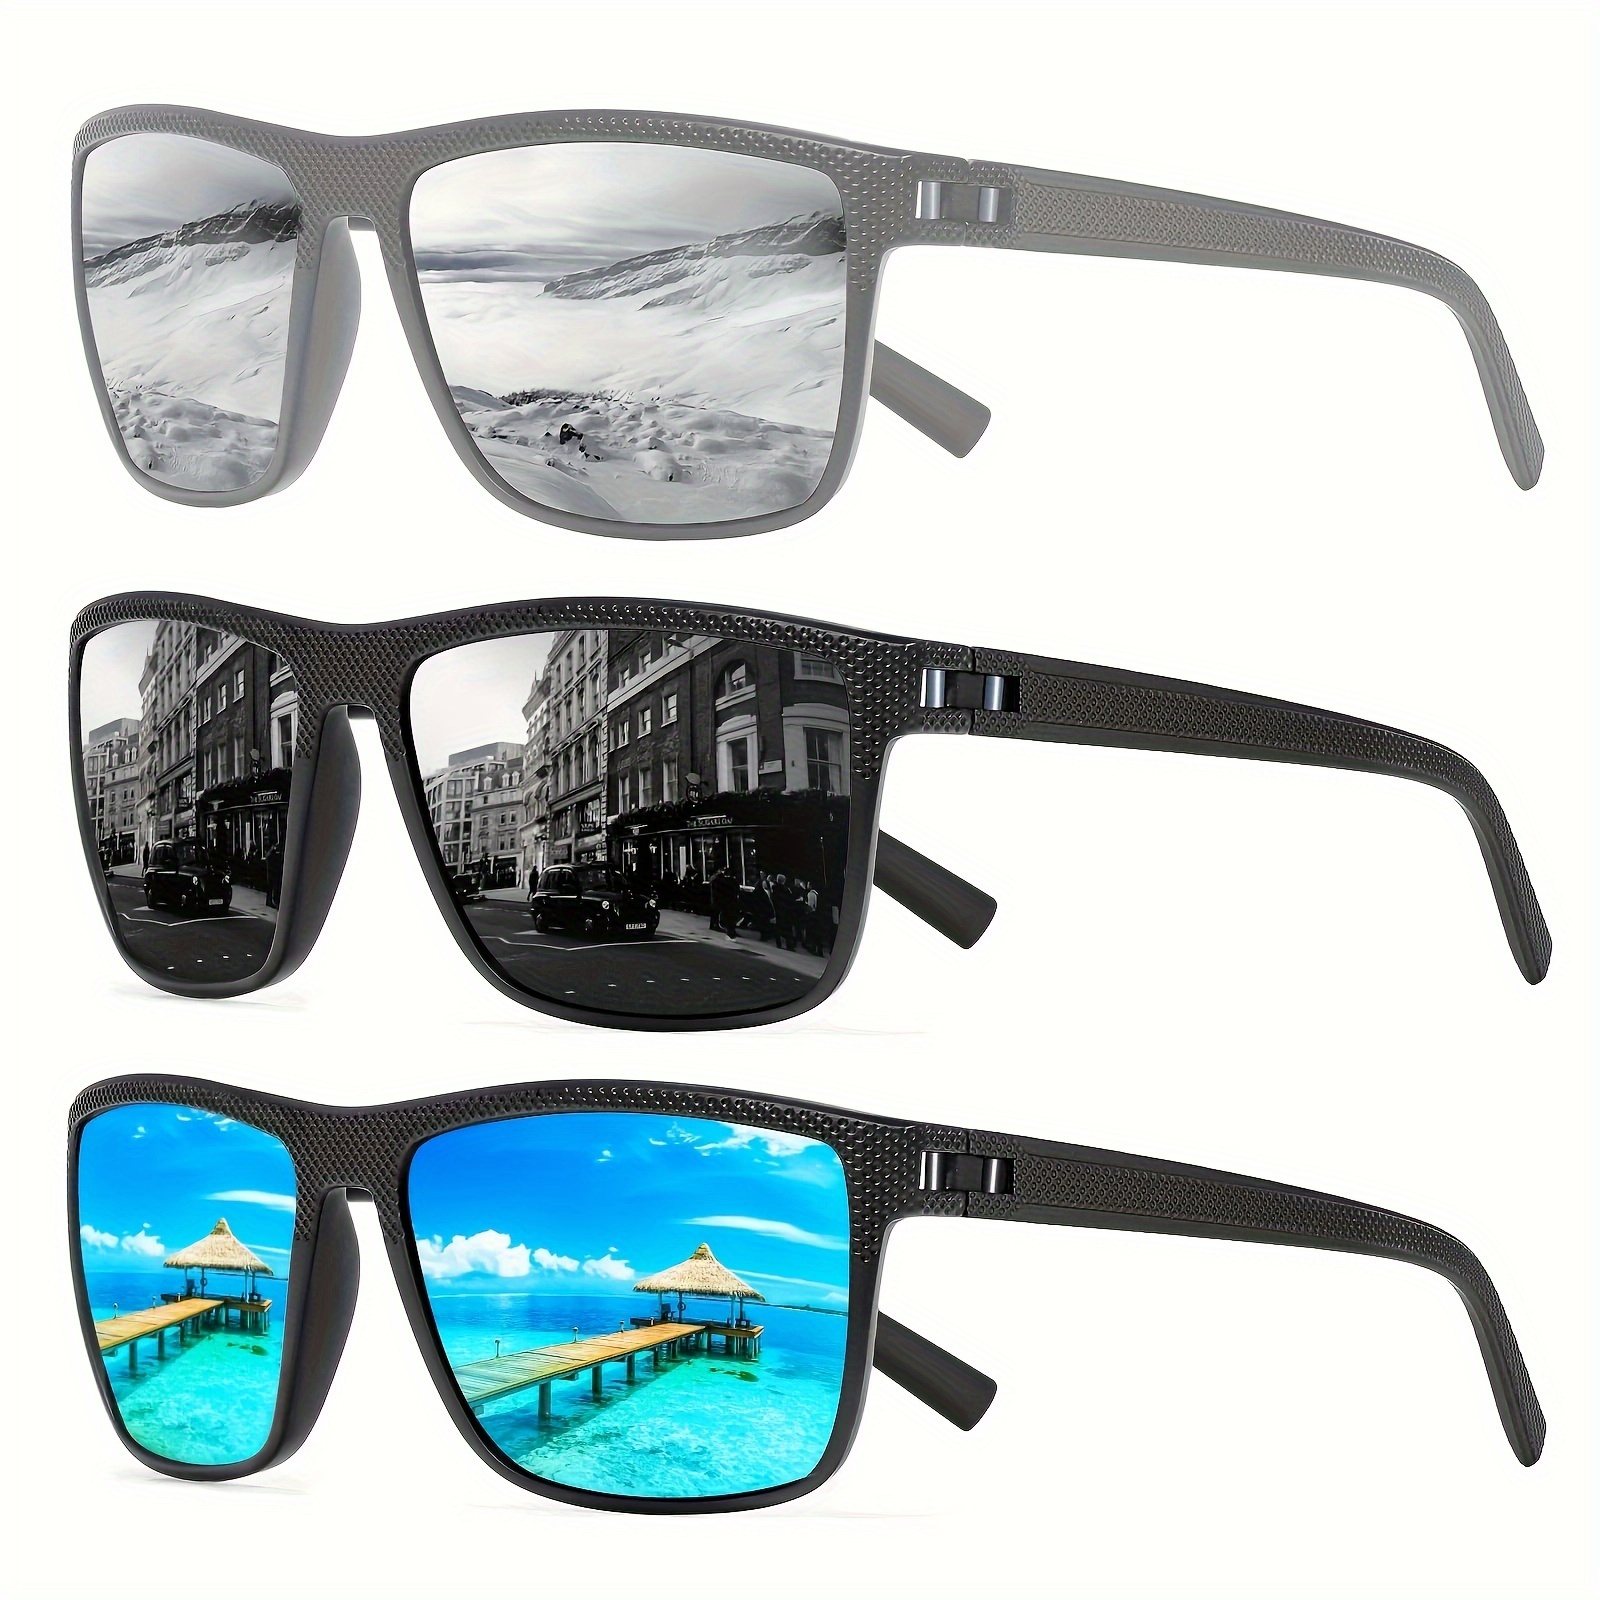 

3 Pairs Of Stylish Square Frame Sunglasses - Stylish, Anti-glare And Uv Protective For Men And Women - Ideal For Outdoor Activities, Travel, Driving And Fashion Photography - Ideal Gift Choice